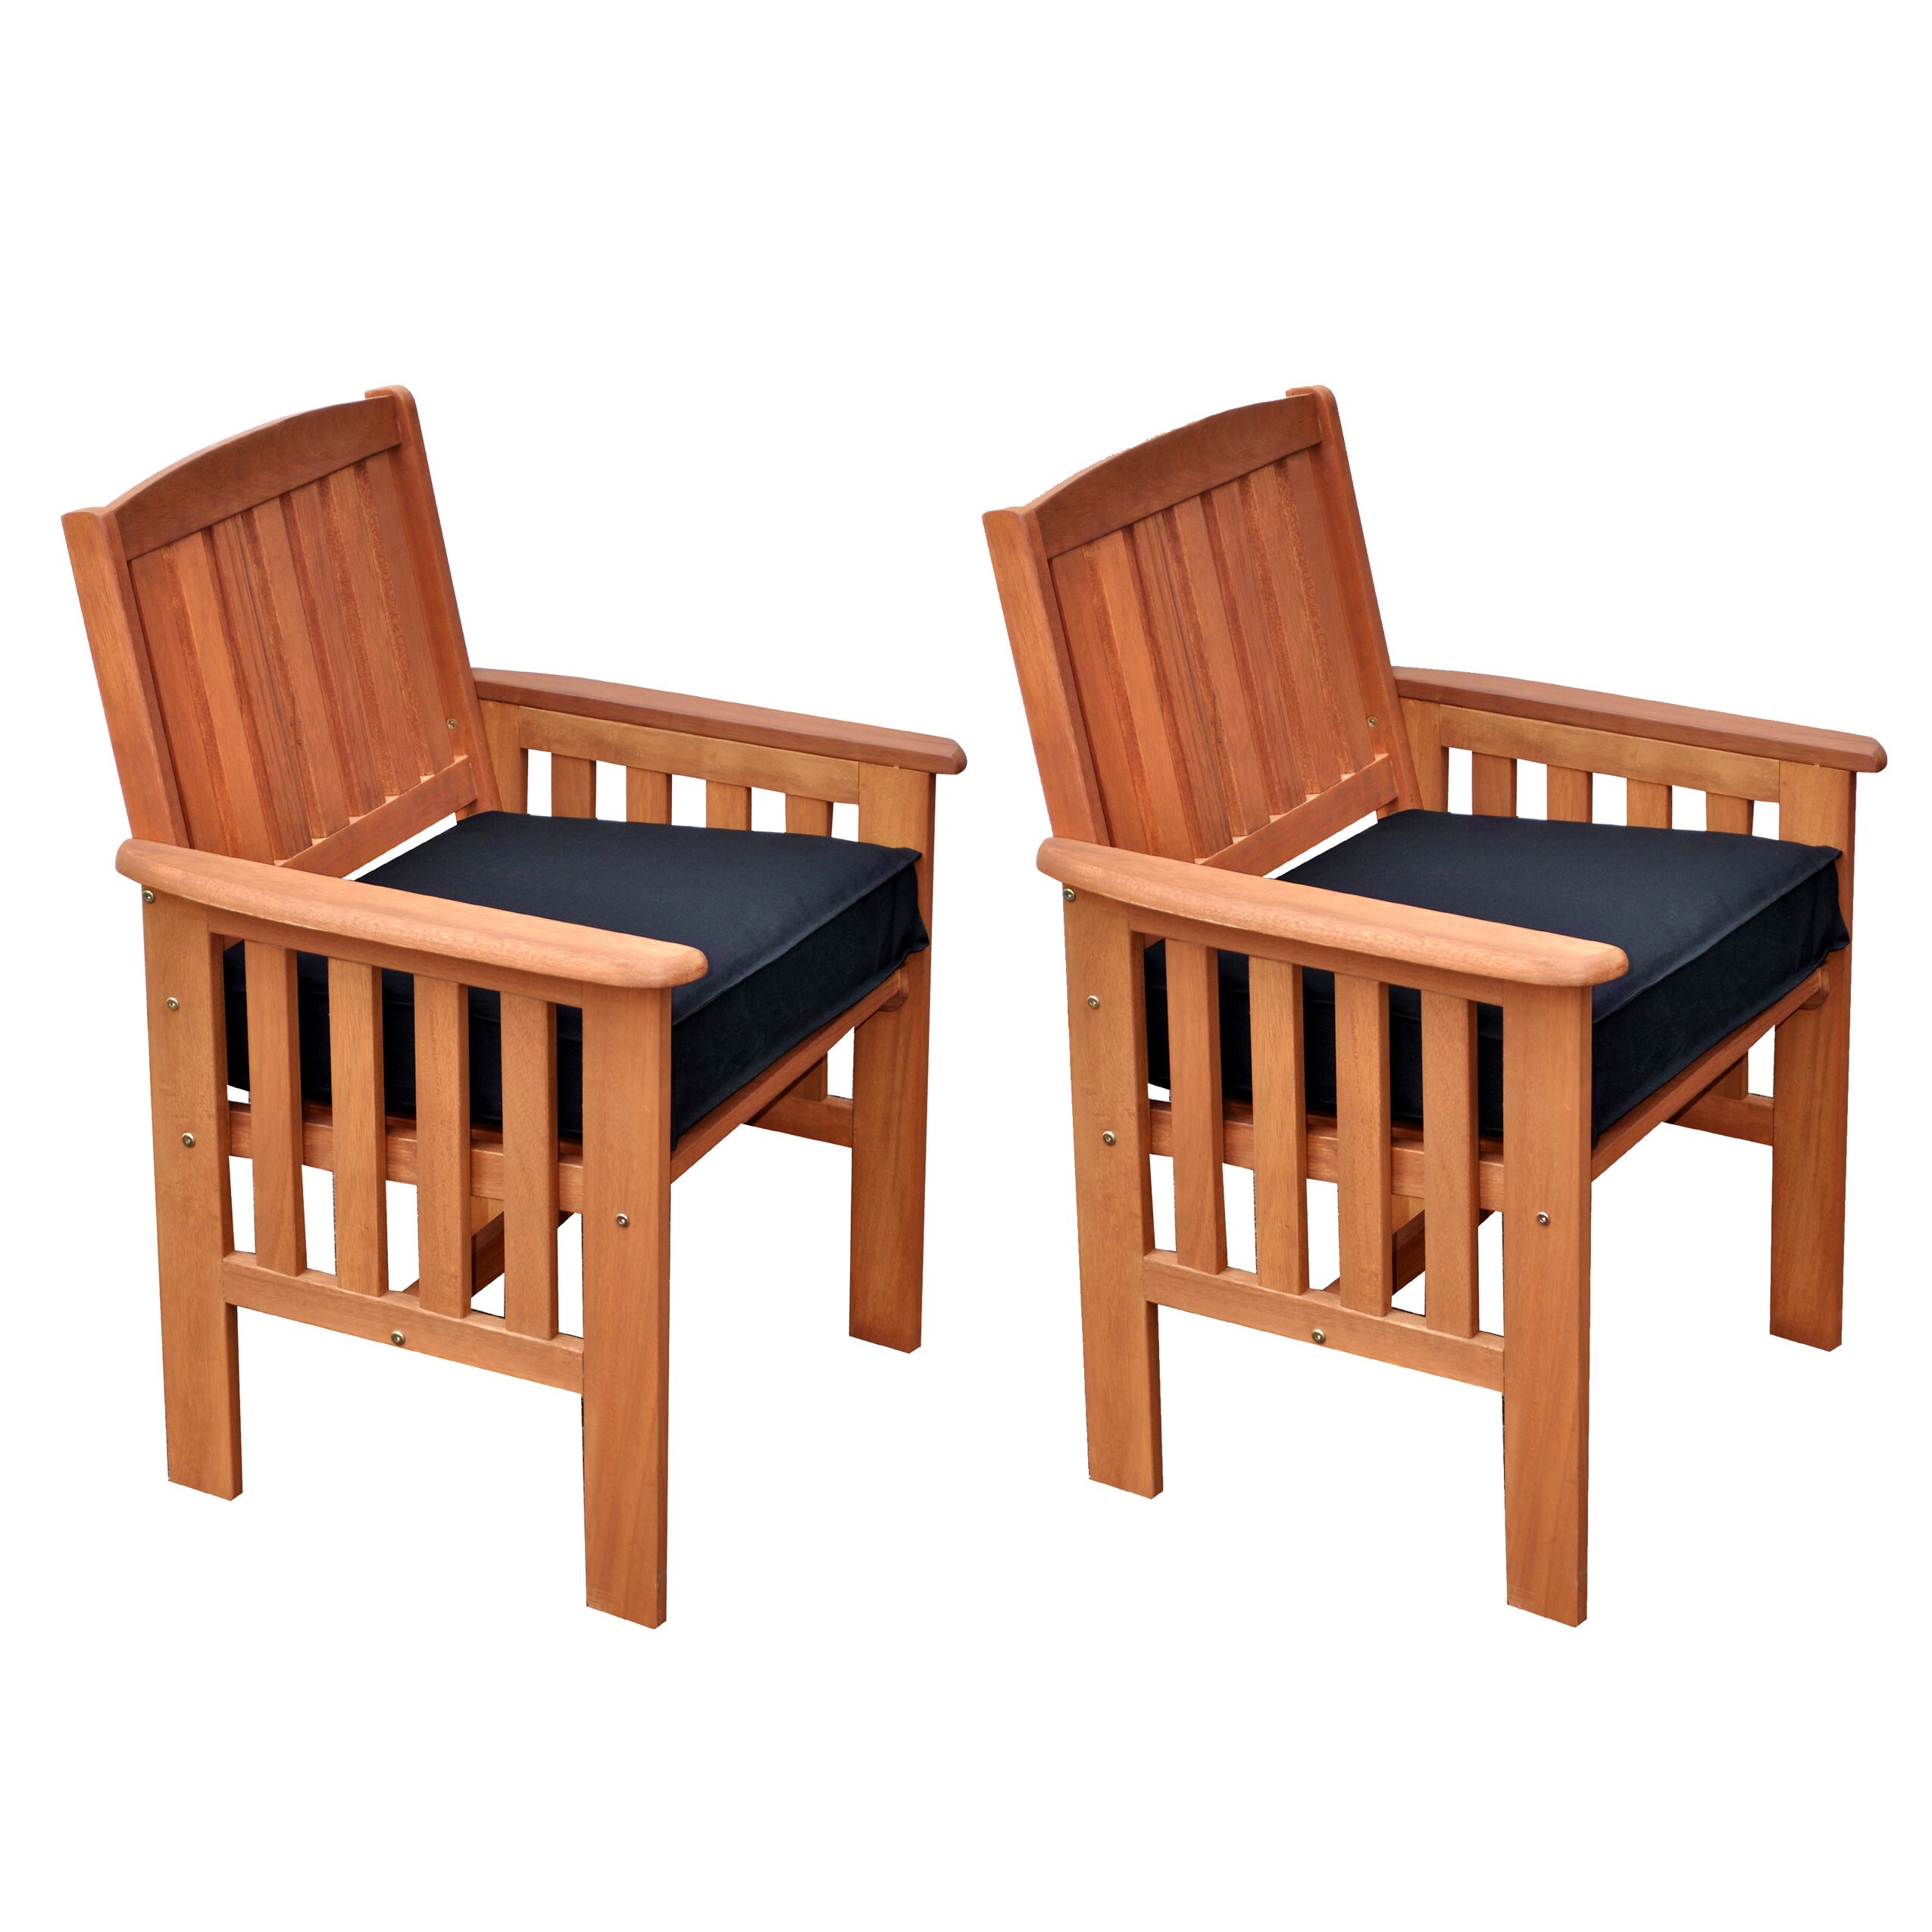 Miramar Set of 2 Cinnamon Brown Wood Frame Stationary Conversation Chair(s) with Black Slat Seat Polyester | - CorLiving PEX-868-C